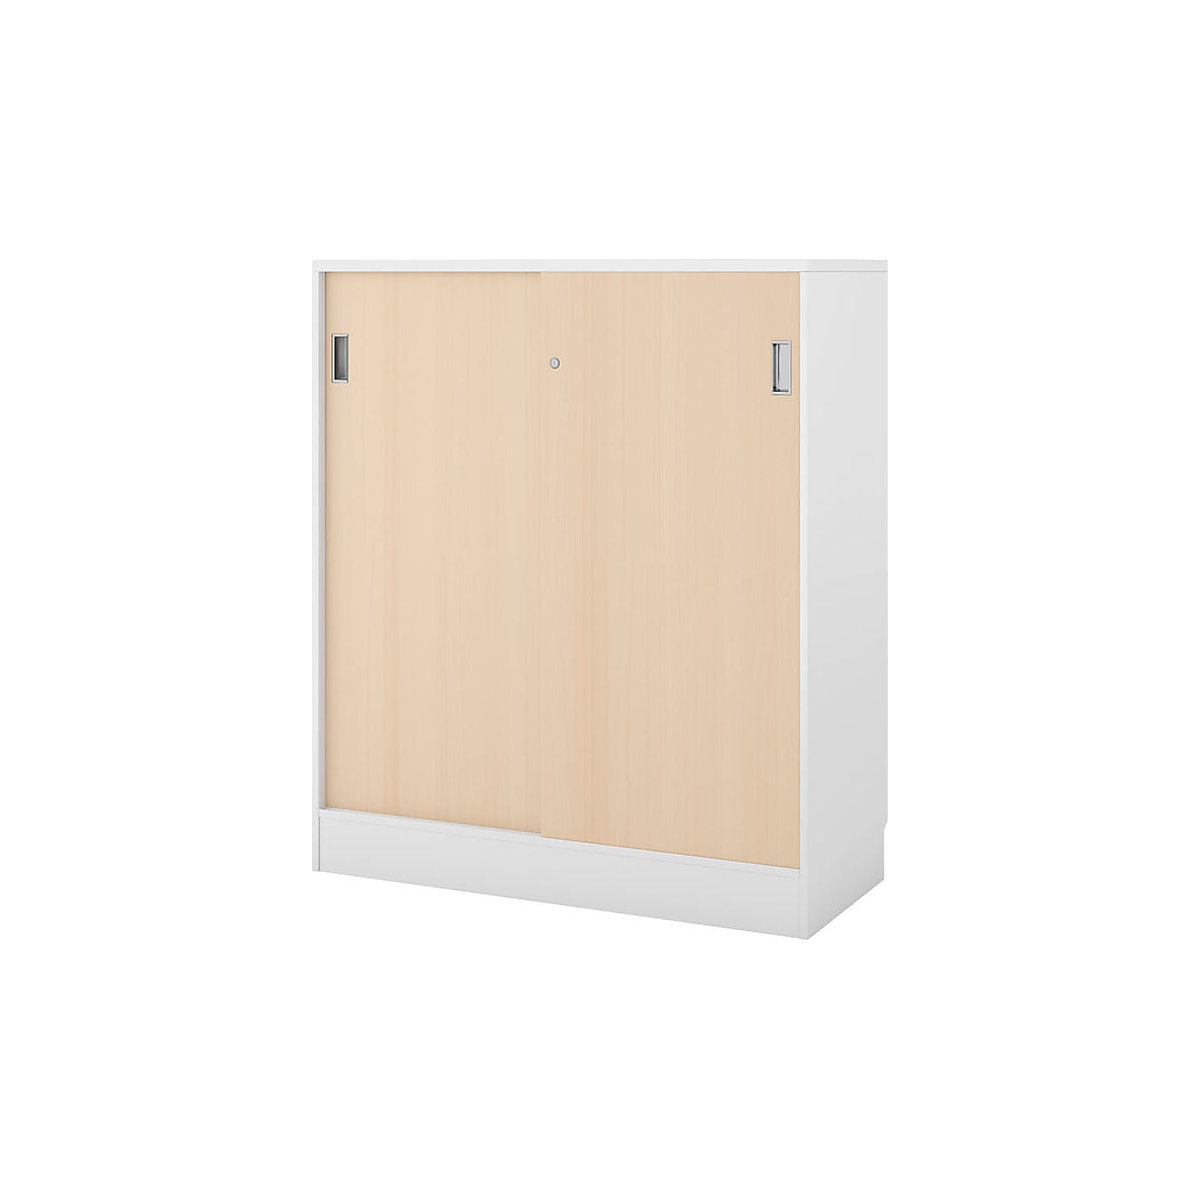 Chicago cupboard with sliding doors, HxWxD 1353 x 1215 x 400 mm, brushed white / birch-11